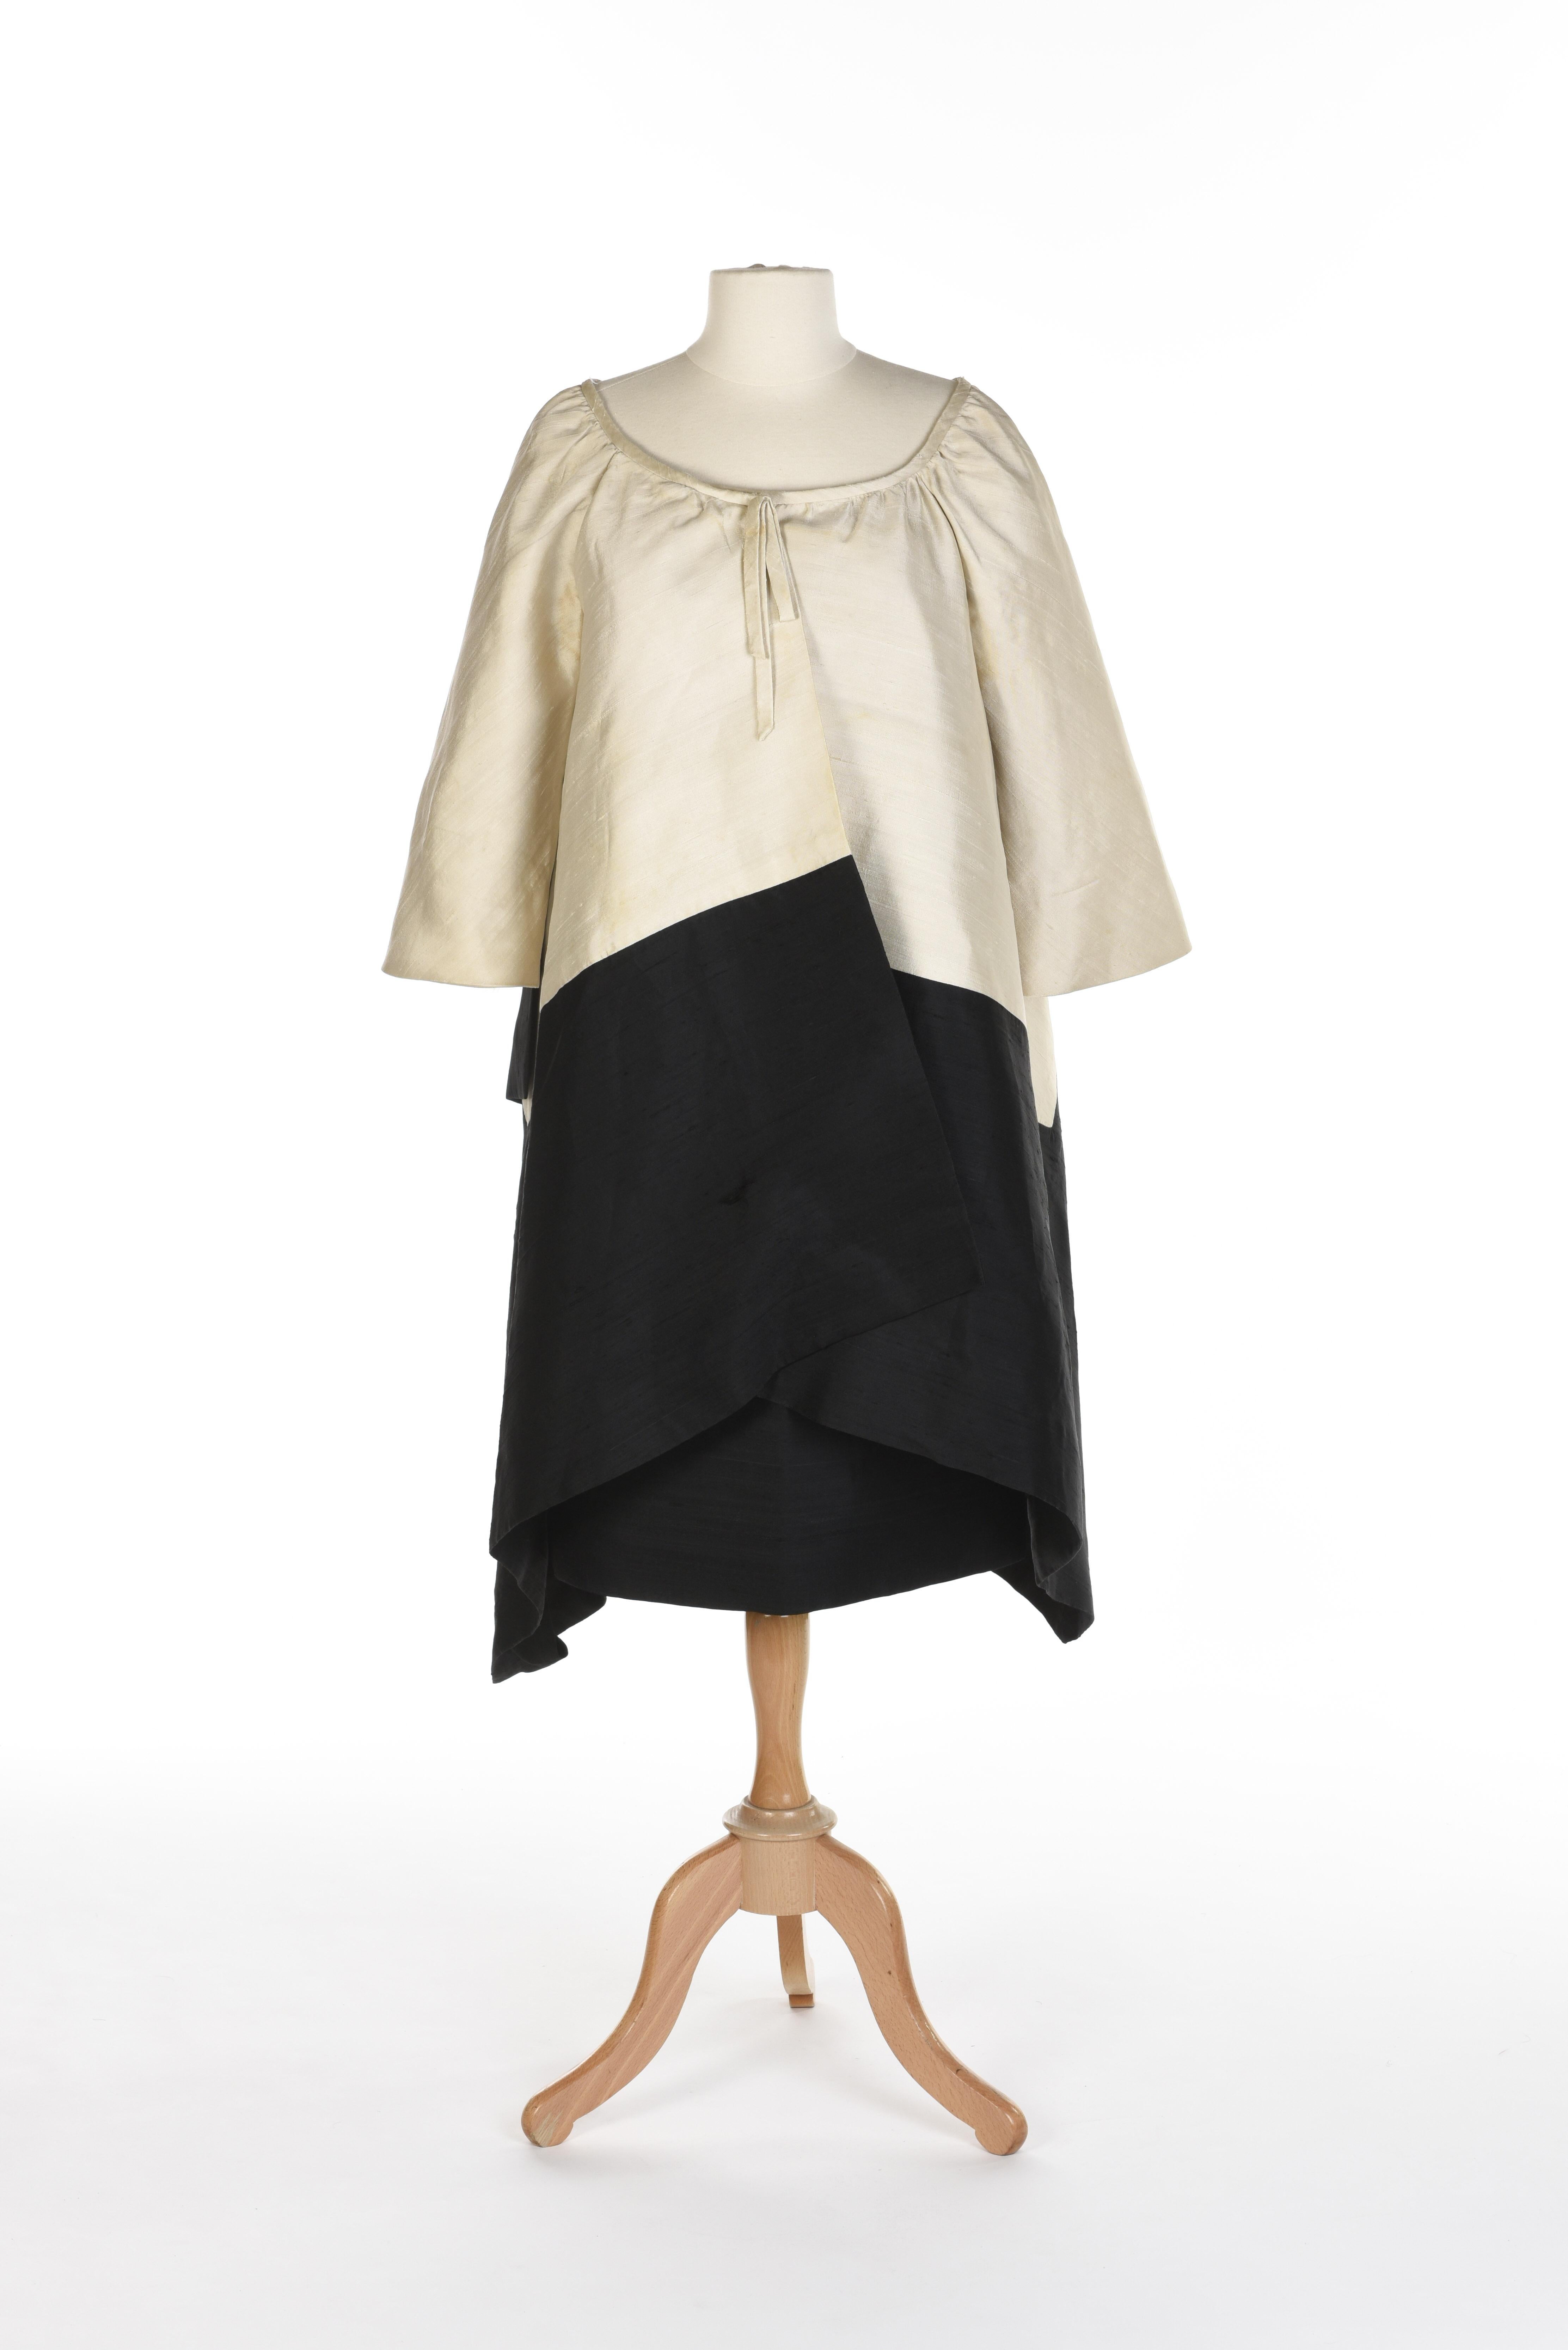 An Hubert de Givenchy French Couture Cream and Black silk Evening Set Circa 1965 For Sale 1